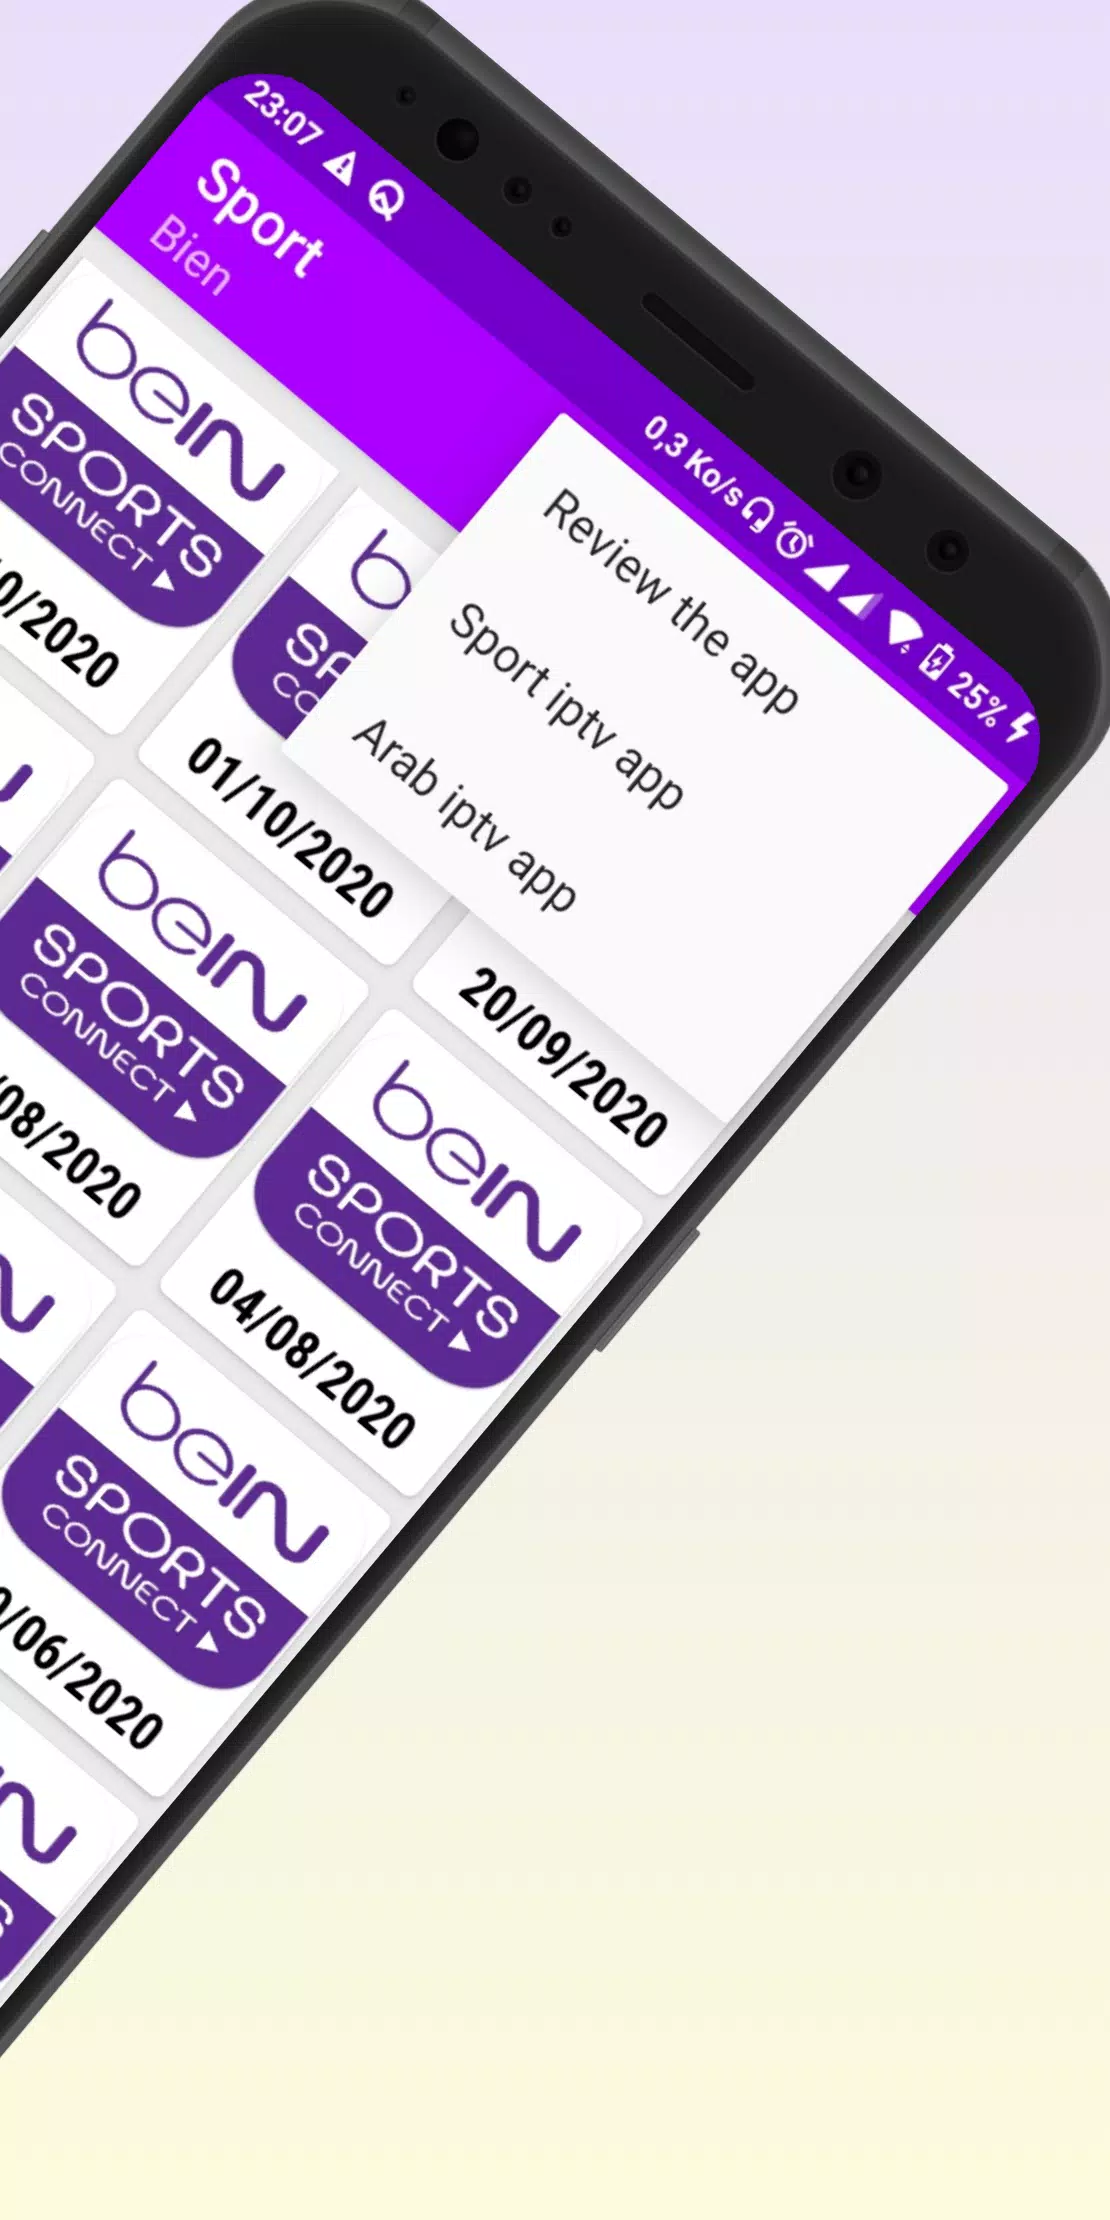 iptv channels bein sport for Android - APK Download